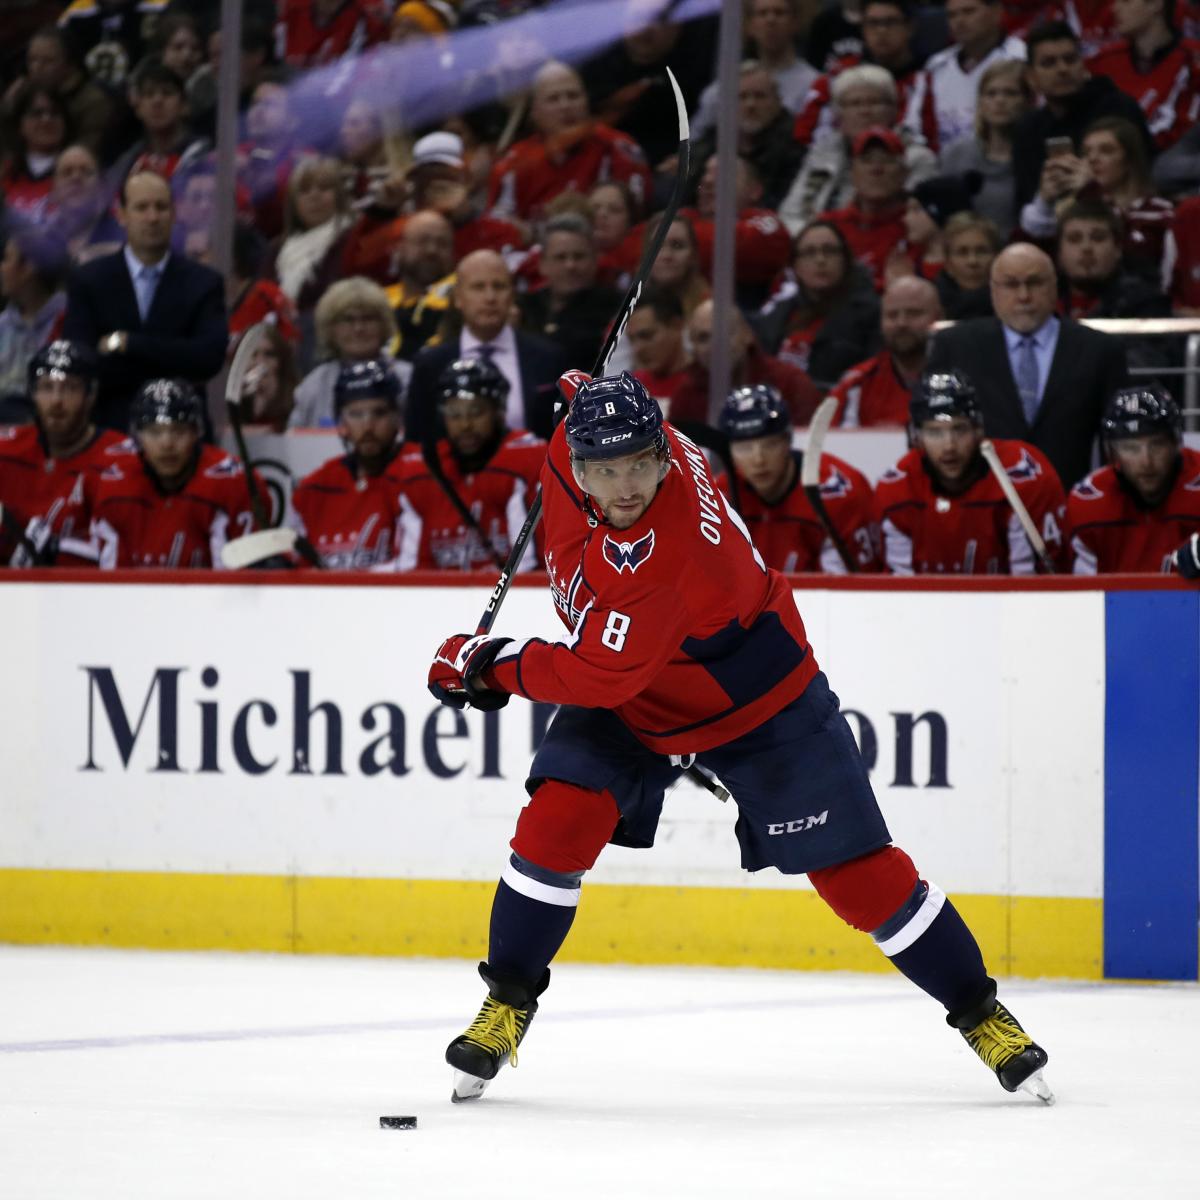 Alex Ovechkin hits 800 goals, shares 'special moment' with